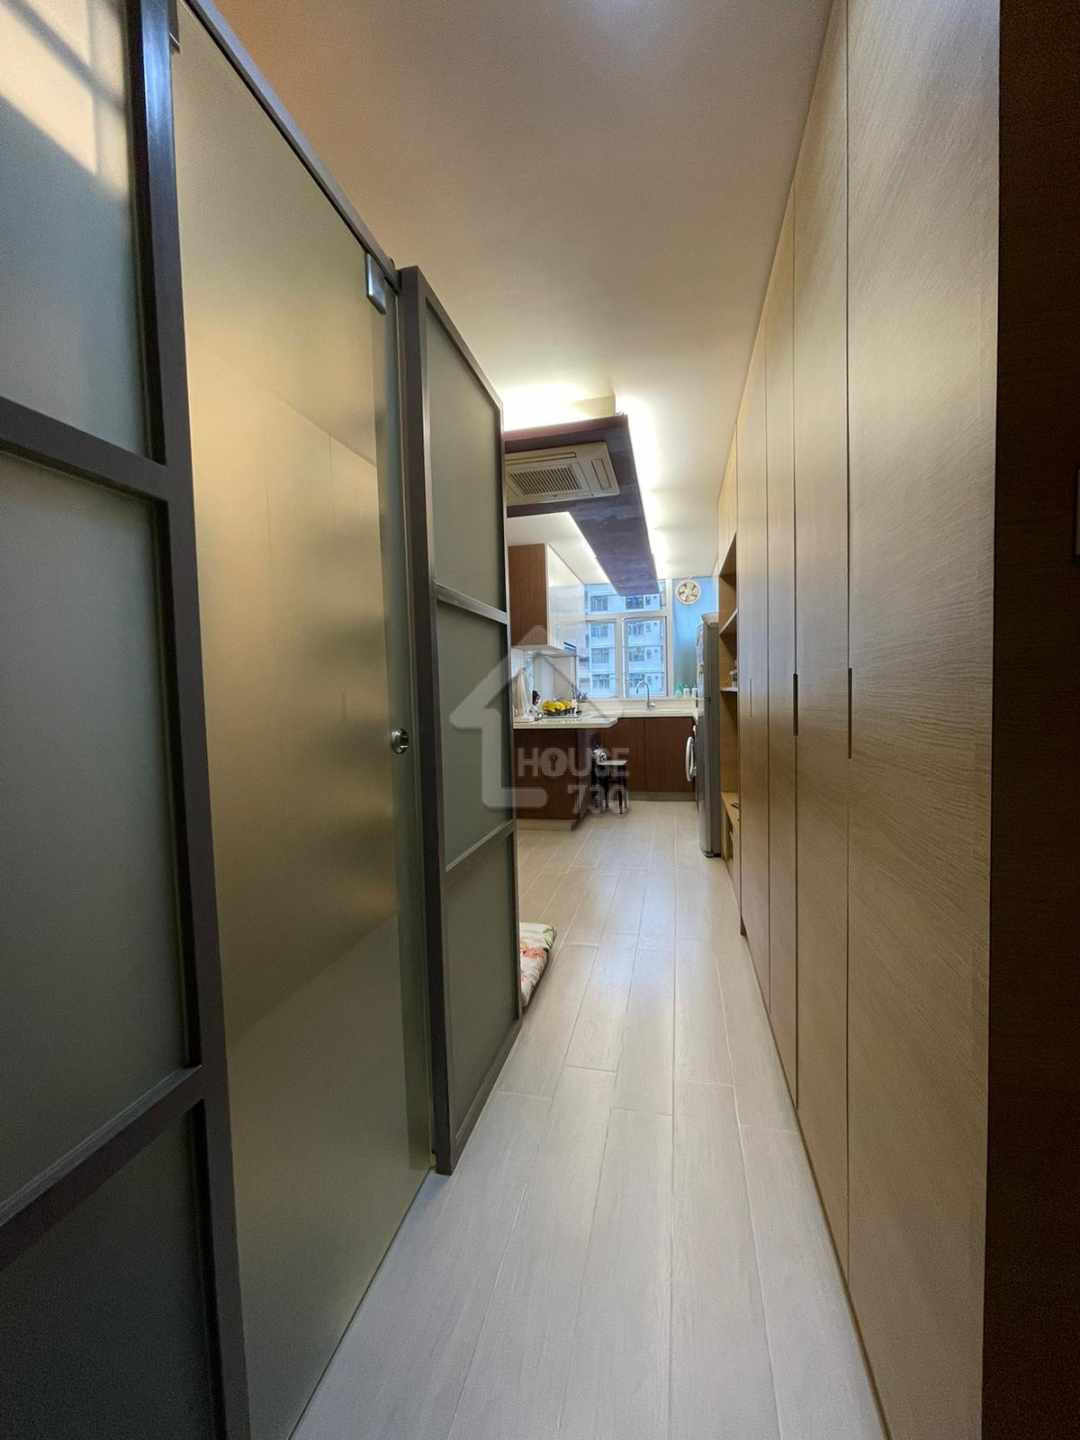 Kwun Tong TSUI PING (NORTH) ESTATE Middle Floor Foyer House730-6624142